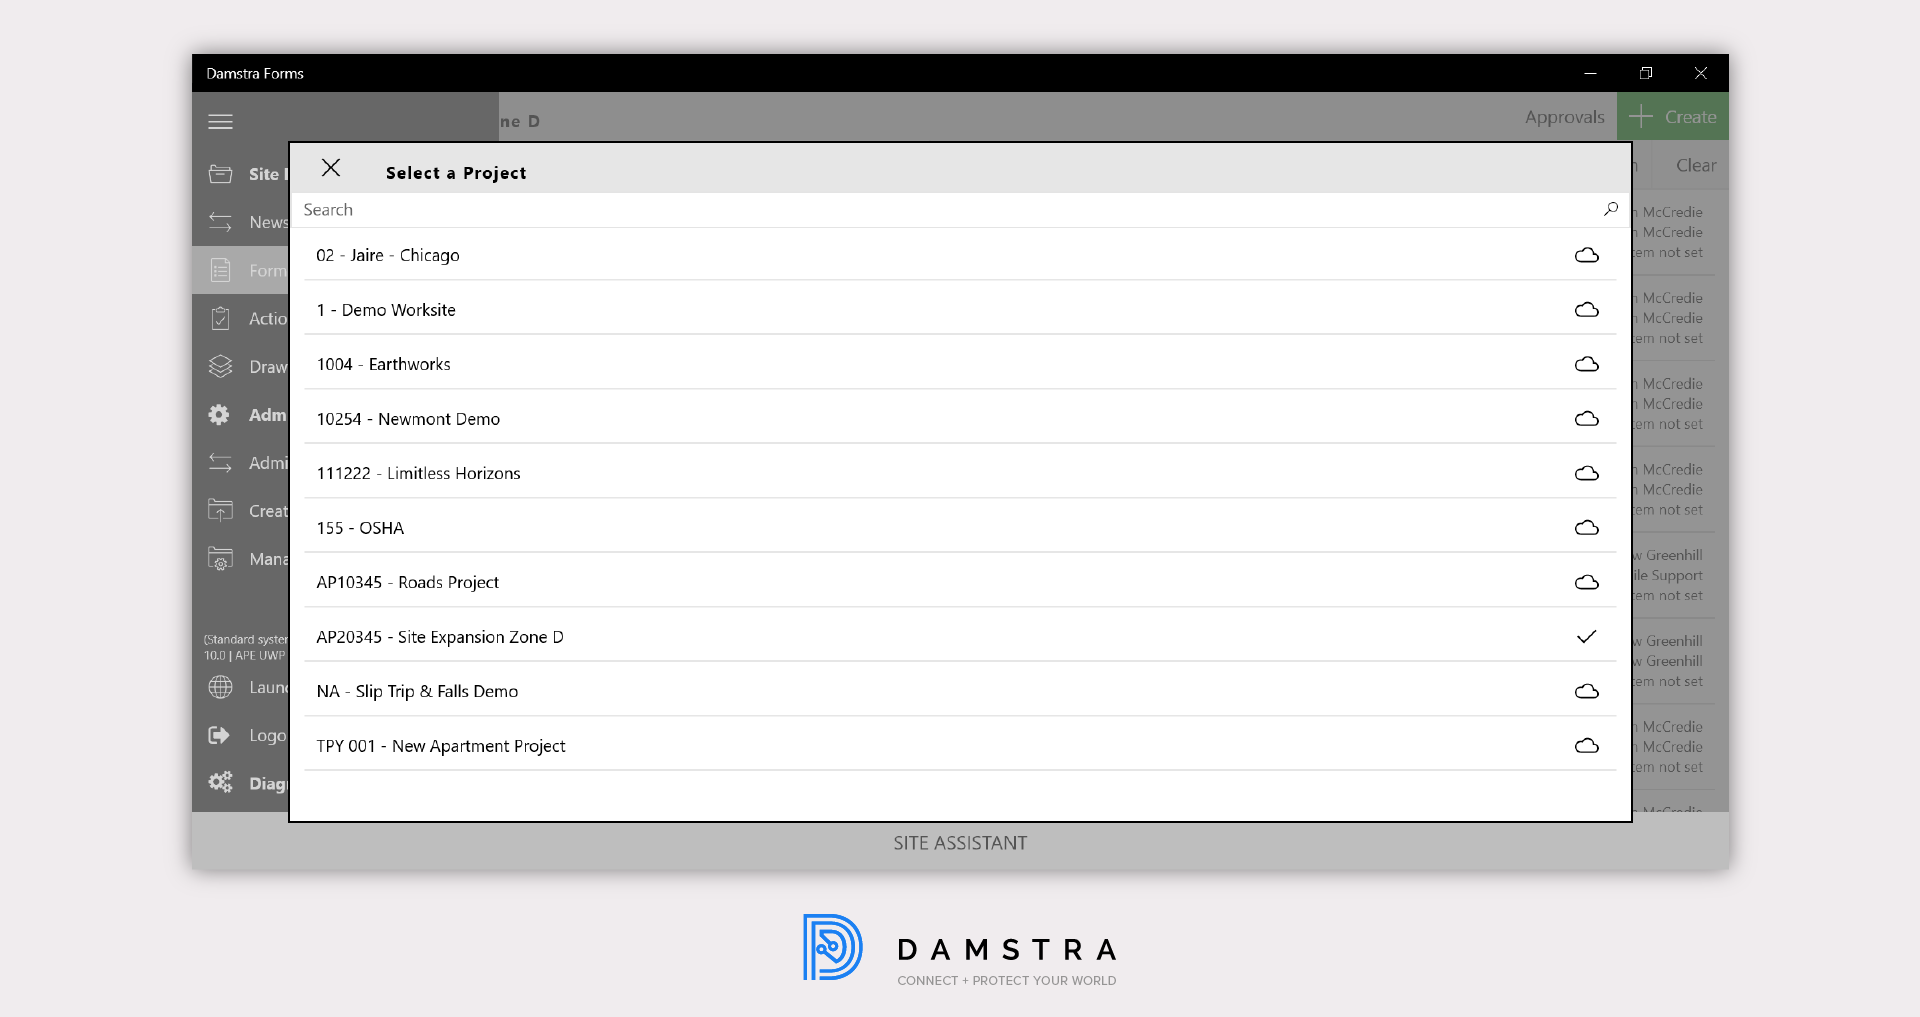 Damstra Forms